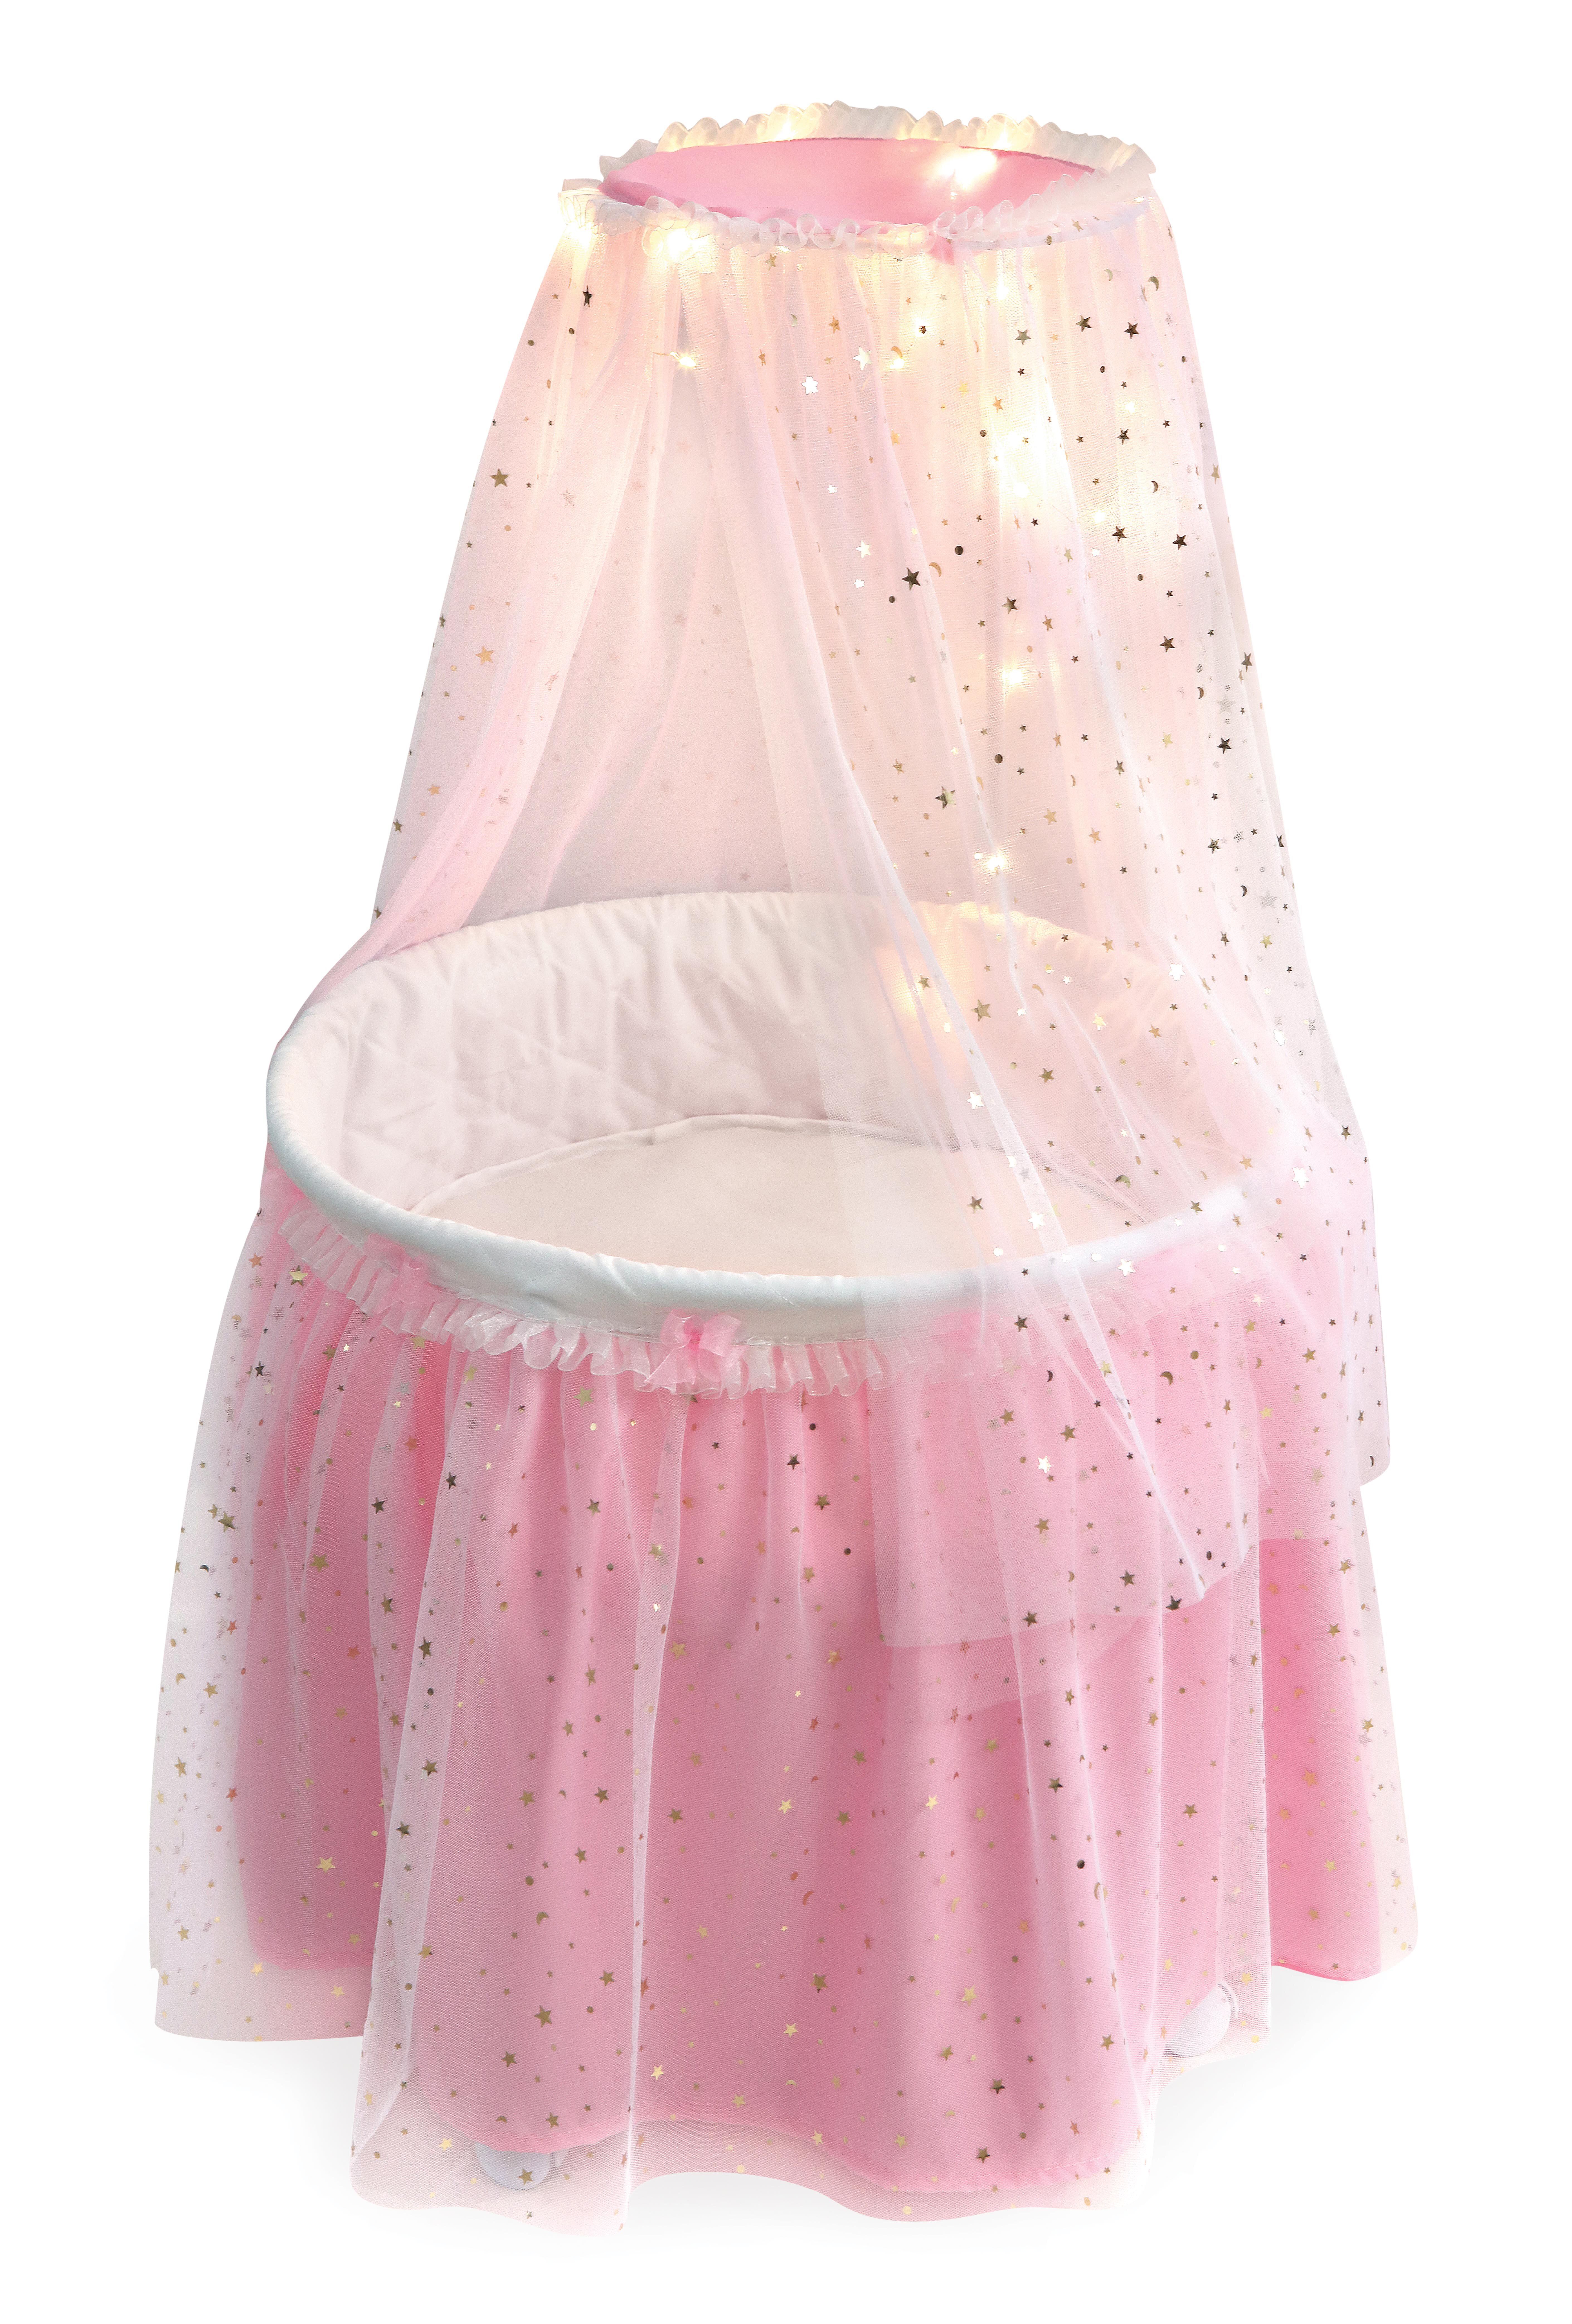 baby bassinet with canopy